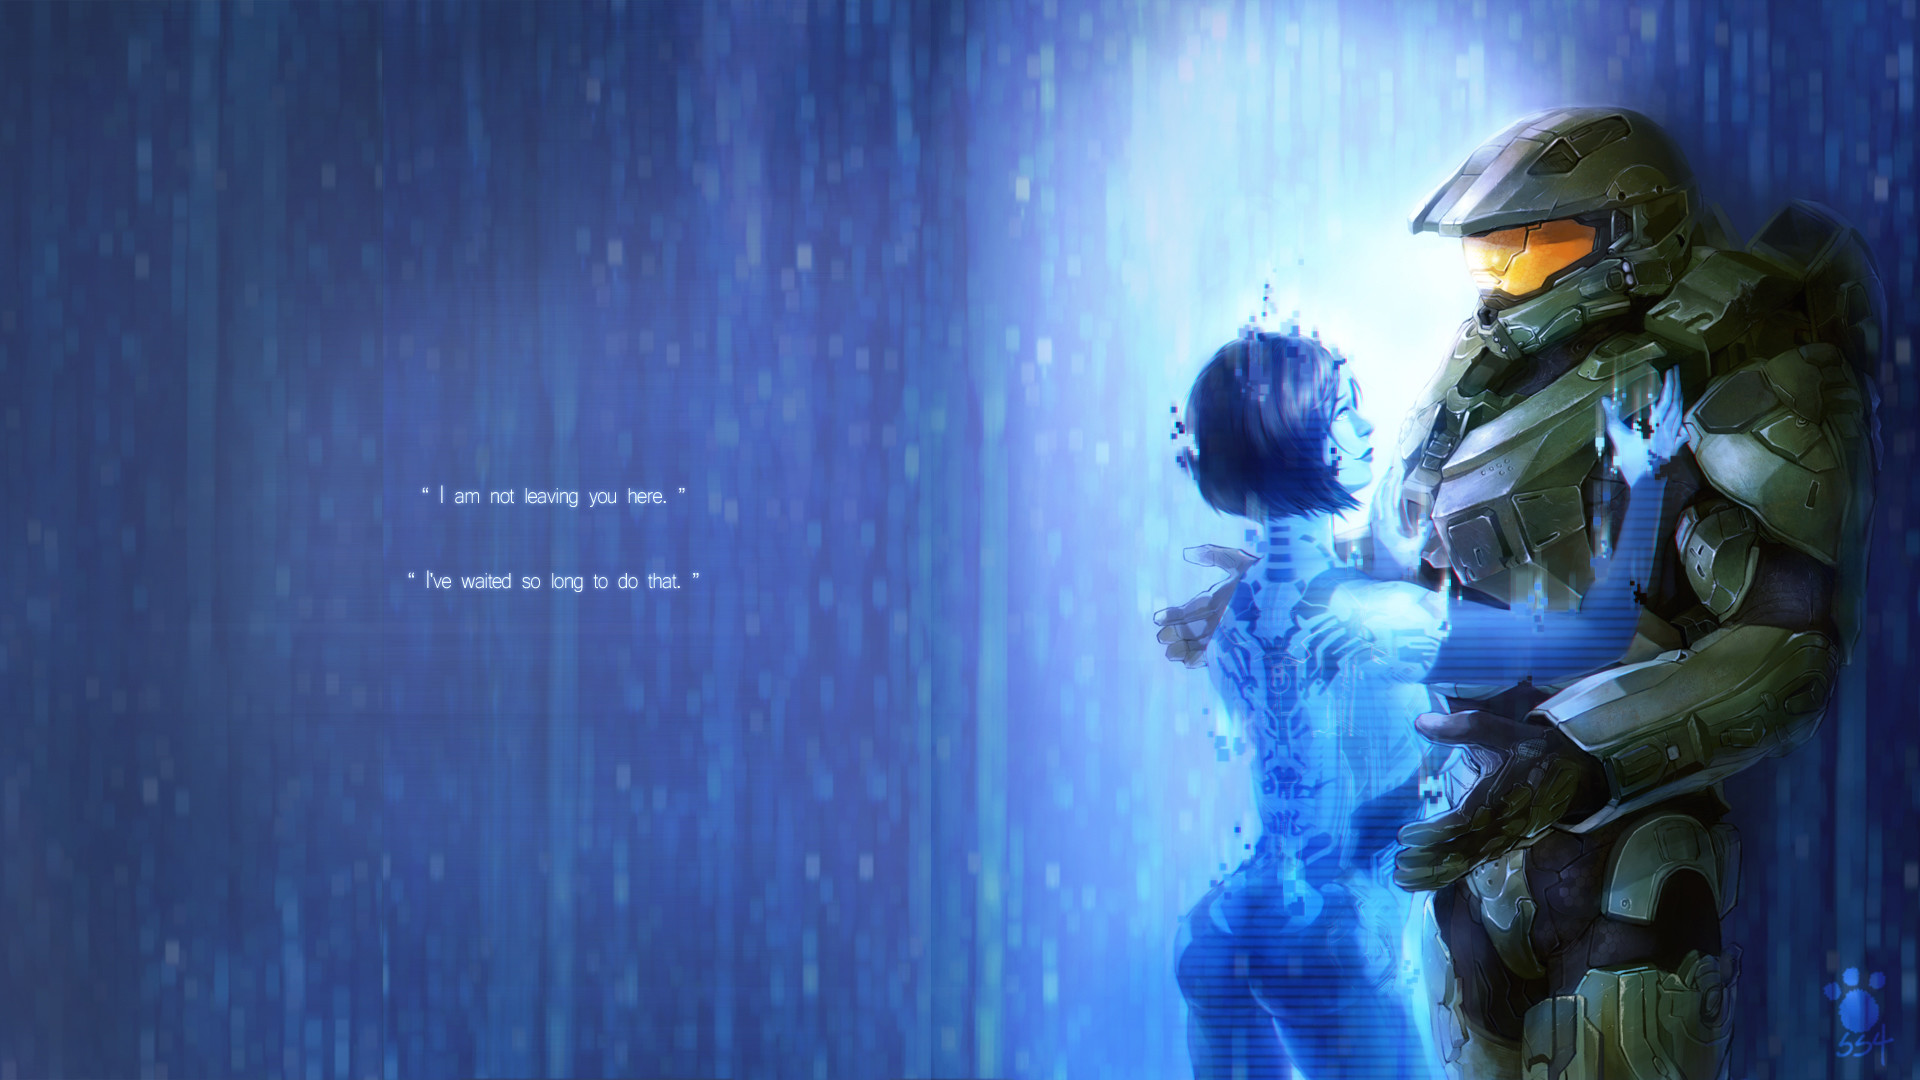 1920x1080 ... HALO 4 - I've waited so long to do that by lotushim554